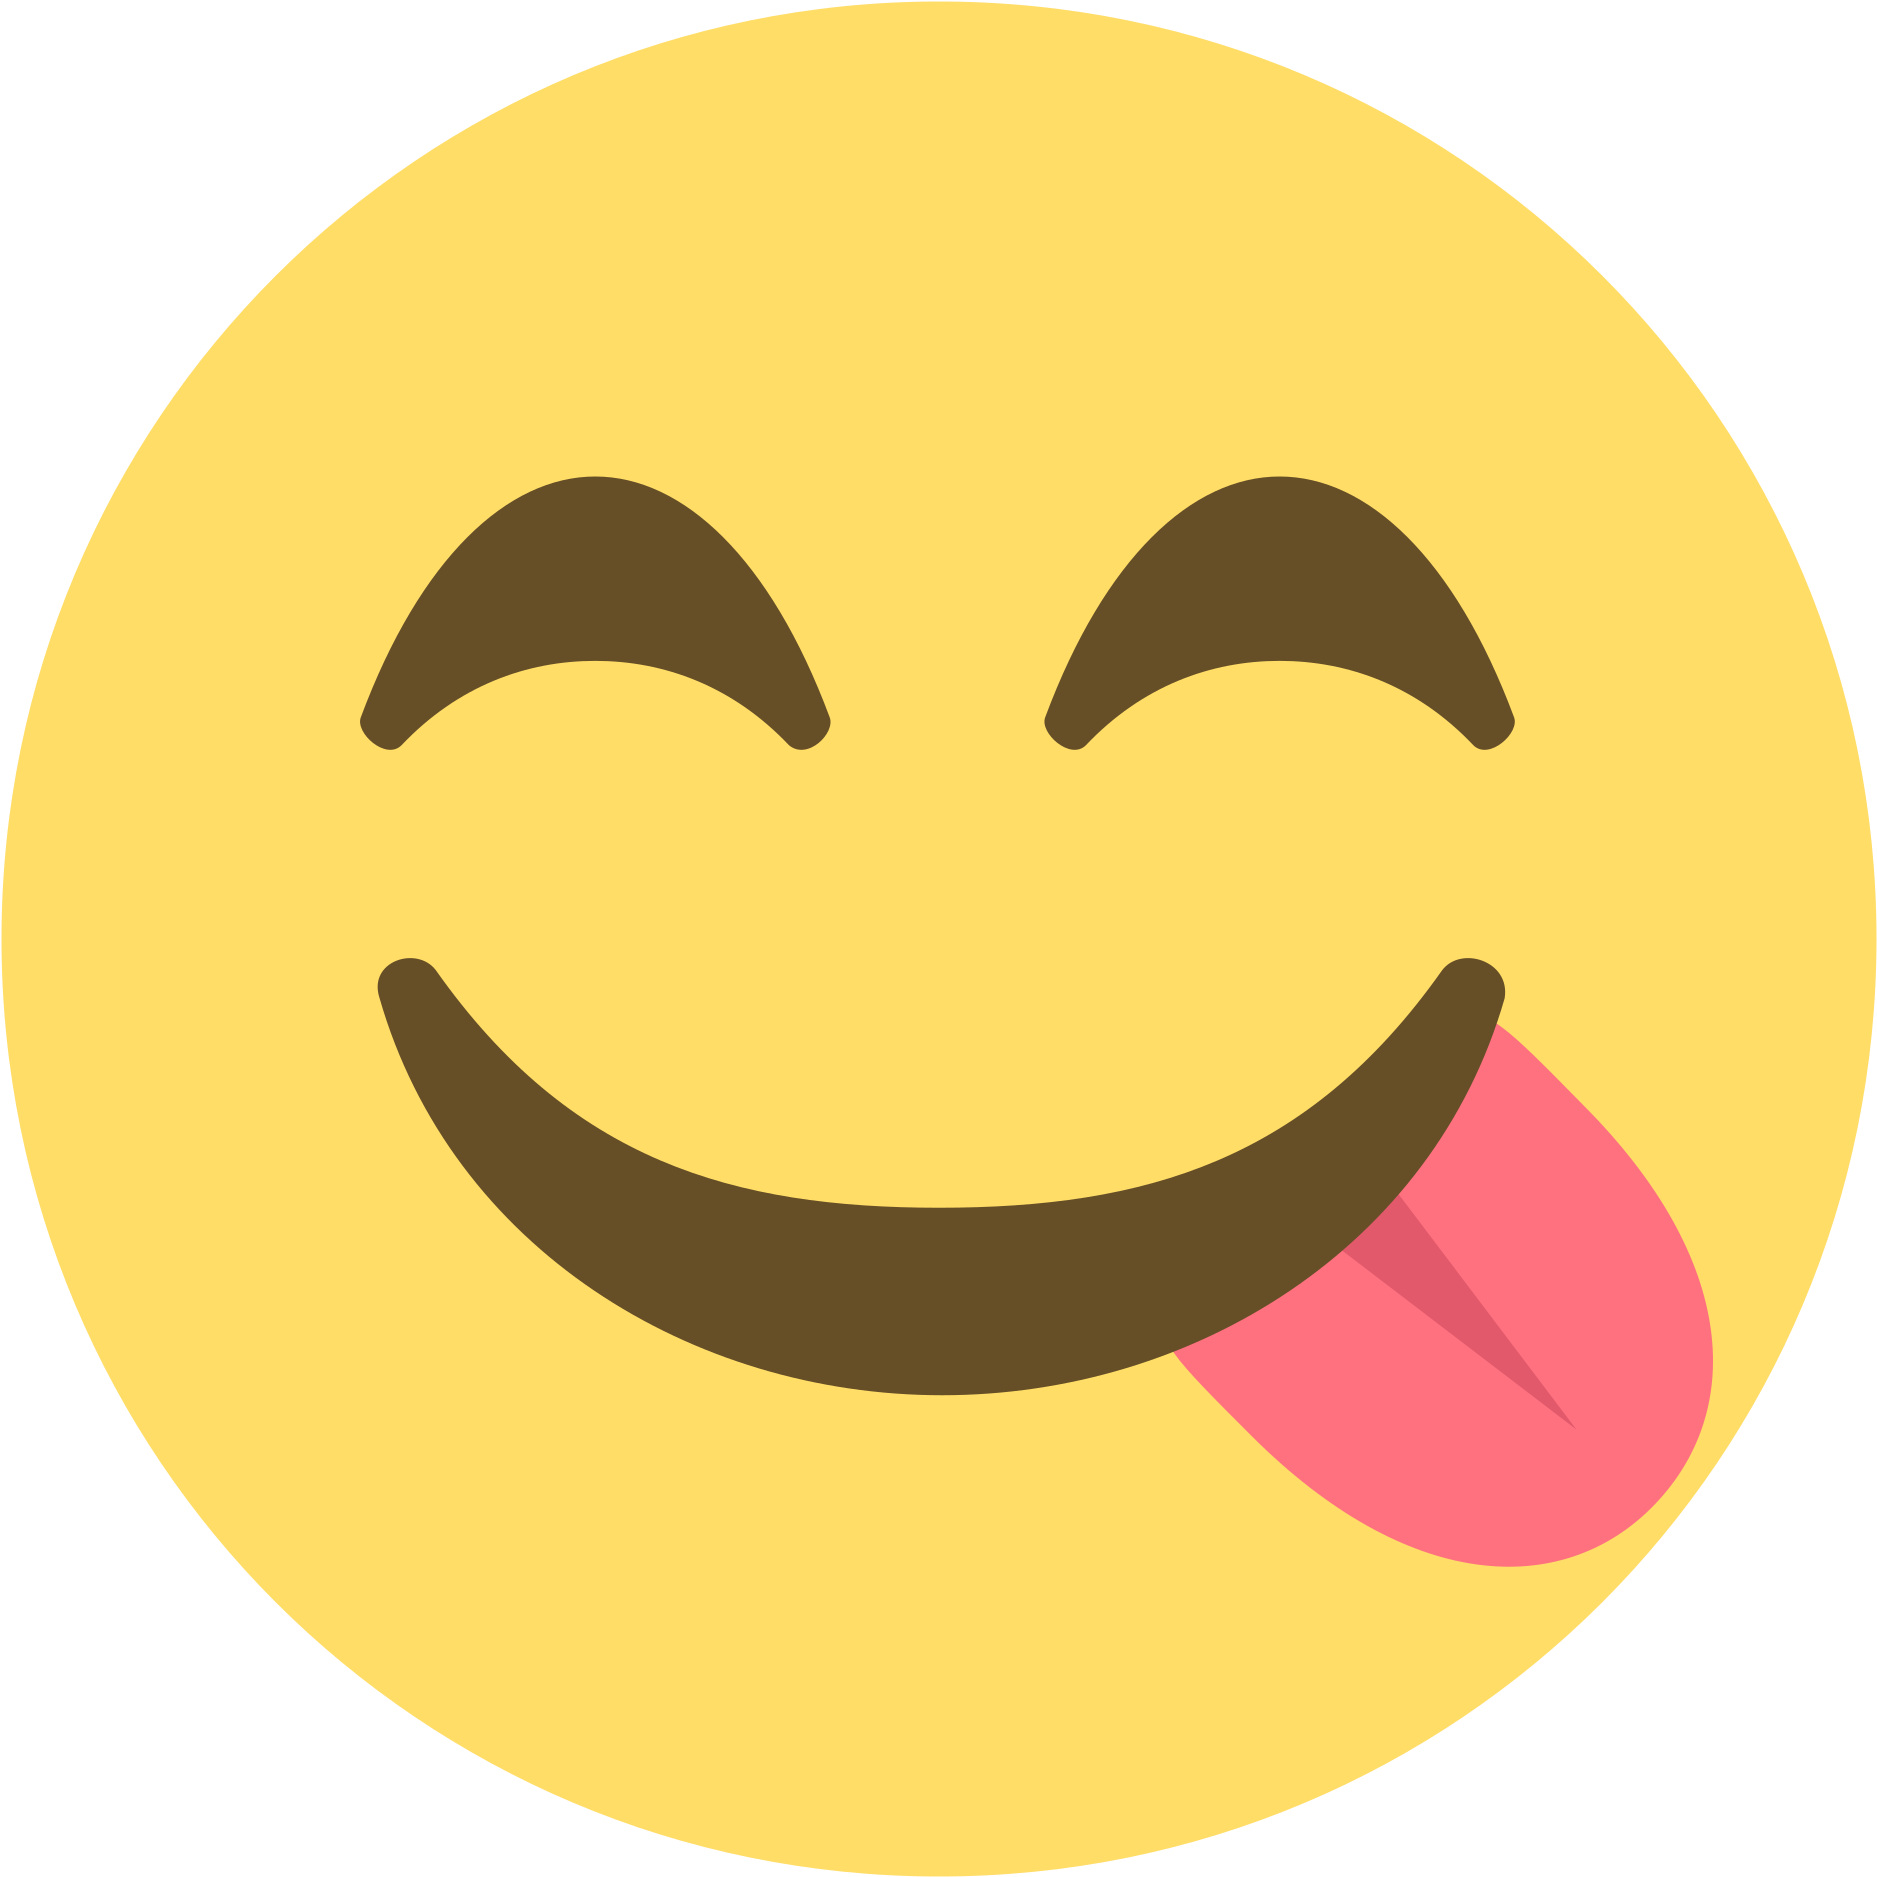 A Yellow Smiley Face With Tongue Sticking Out